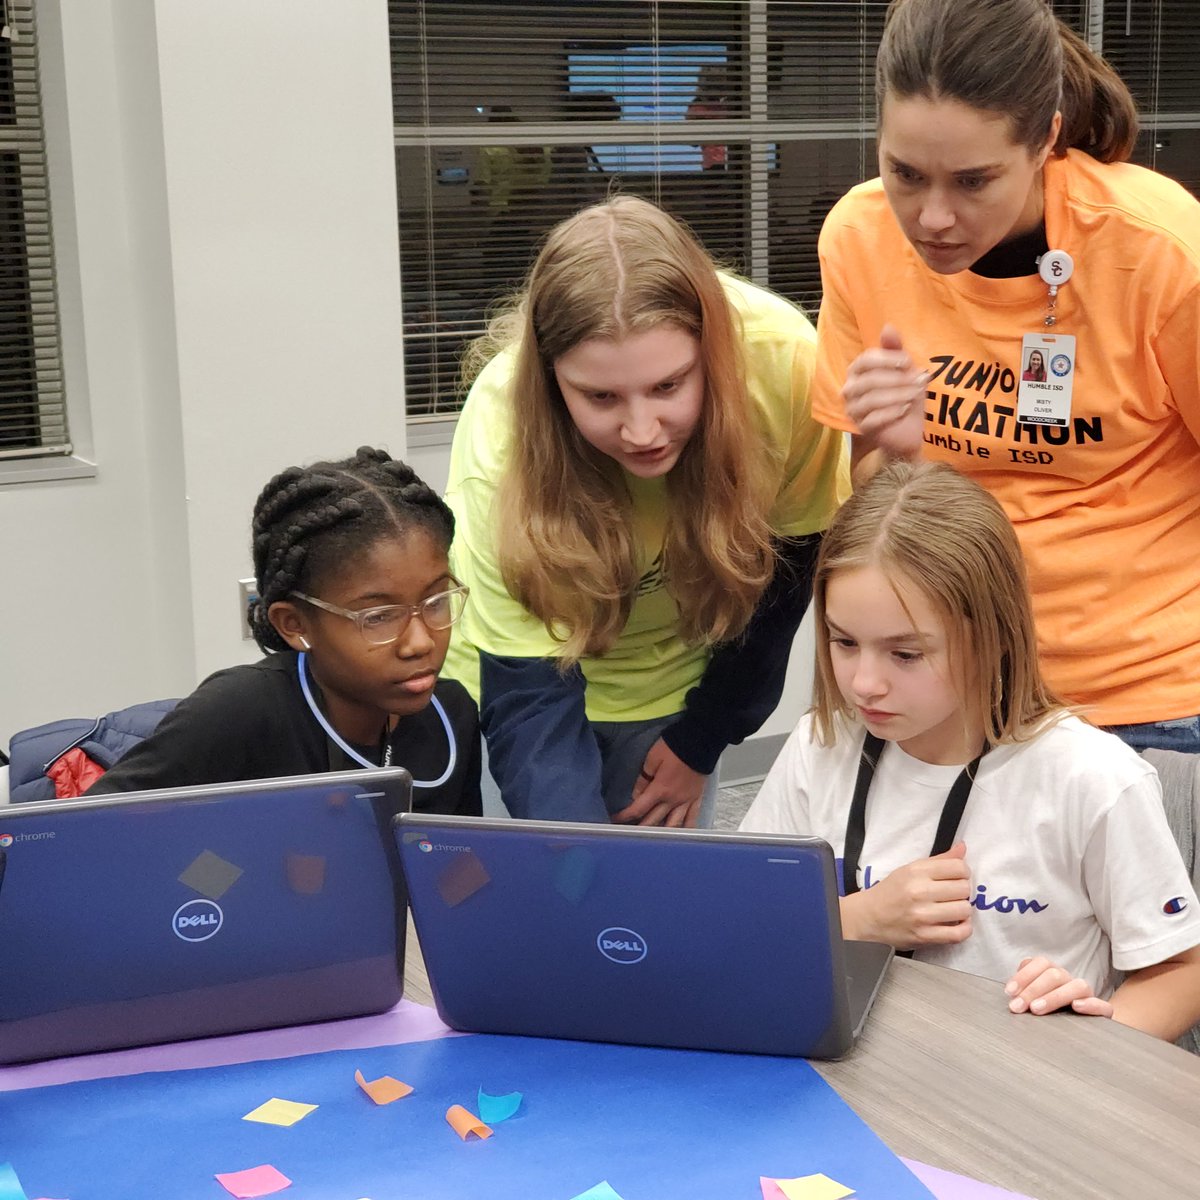 Students from middle schools all around @HumbleISD participating in a Junior Hackathon Coding event with @HumbleISD_DDI @HumbleISD_PL #HumbleISD_TandL